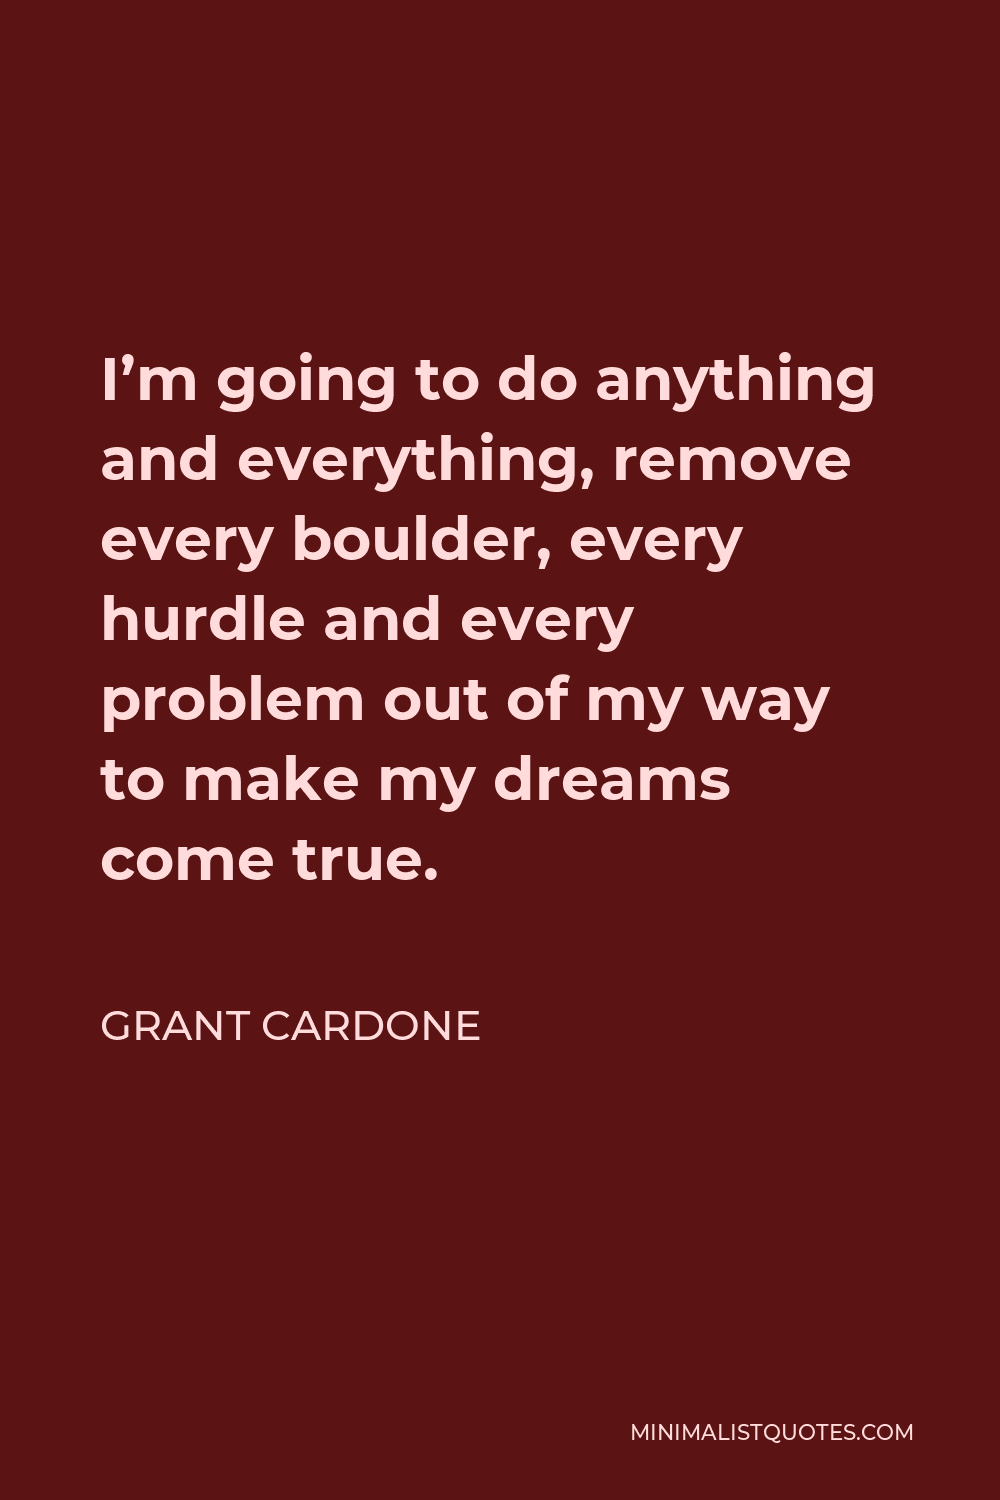 Grant Cardone Quote - I’m going to do anything and everything, remove every boulder, every hurdle and every problem out of my way to make my dreams come true.